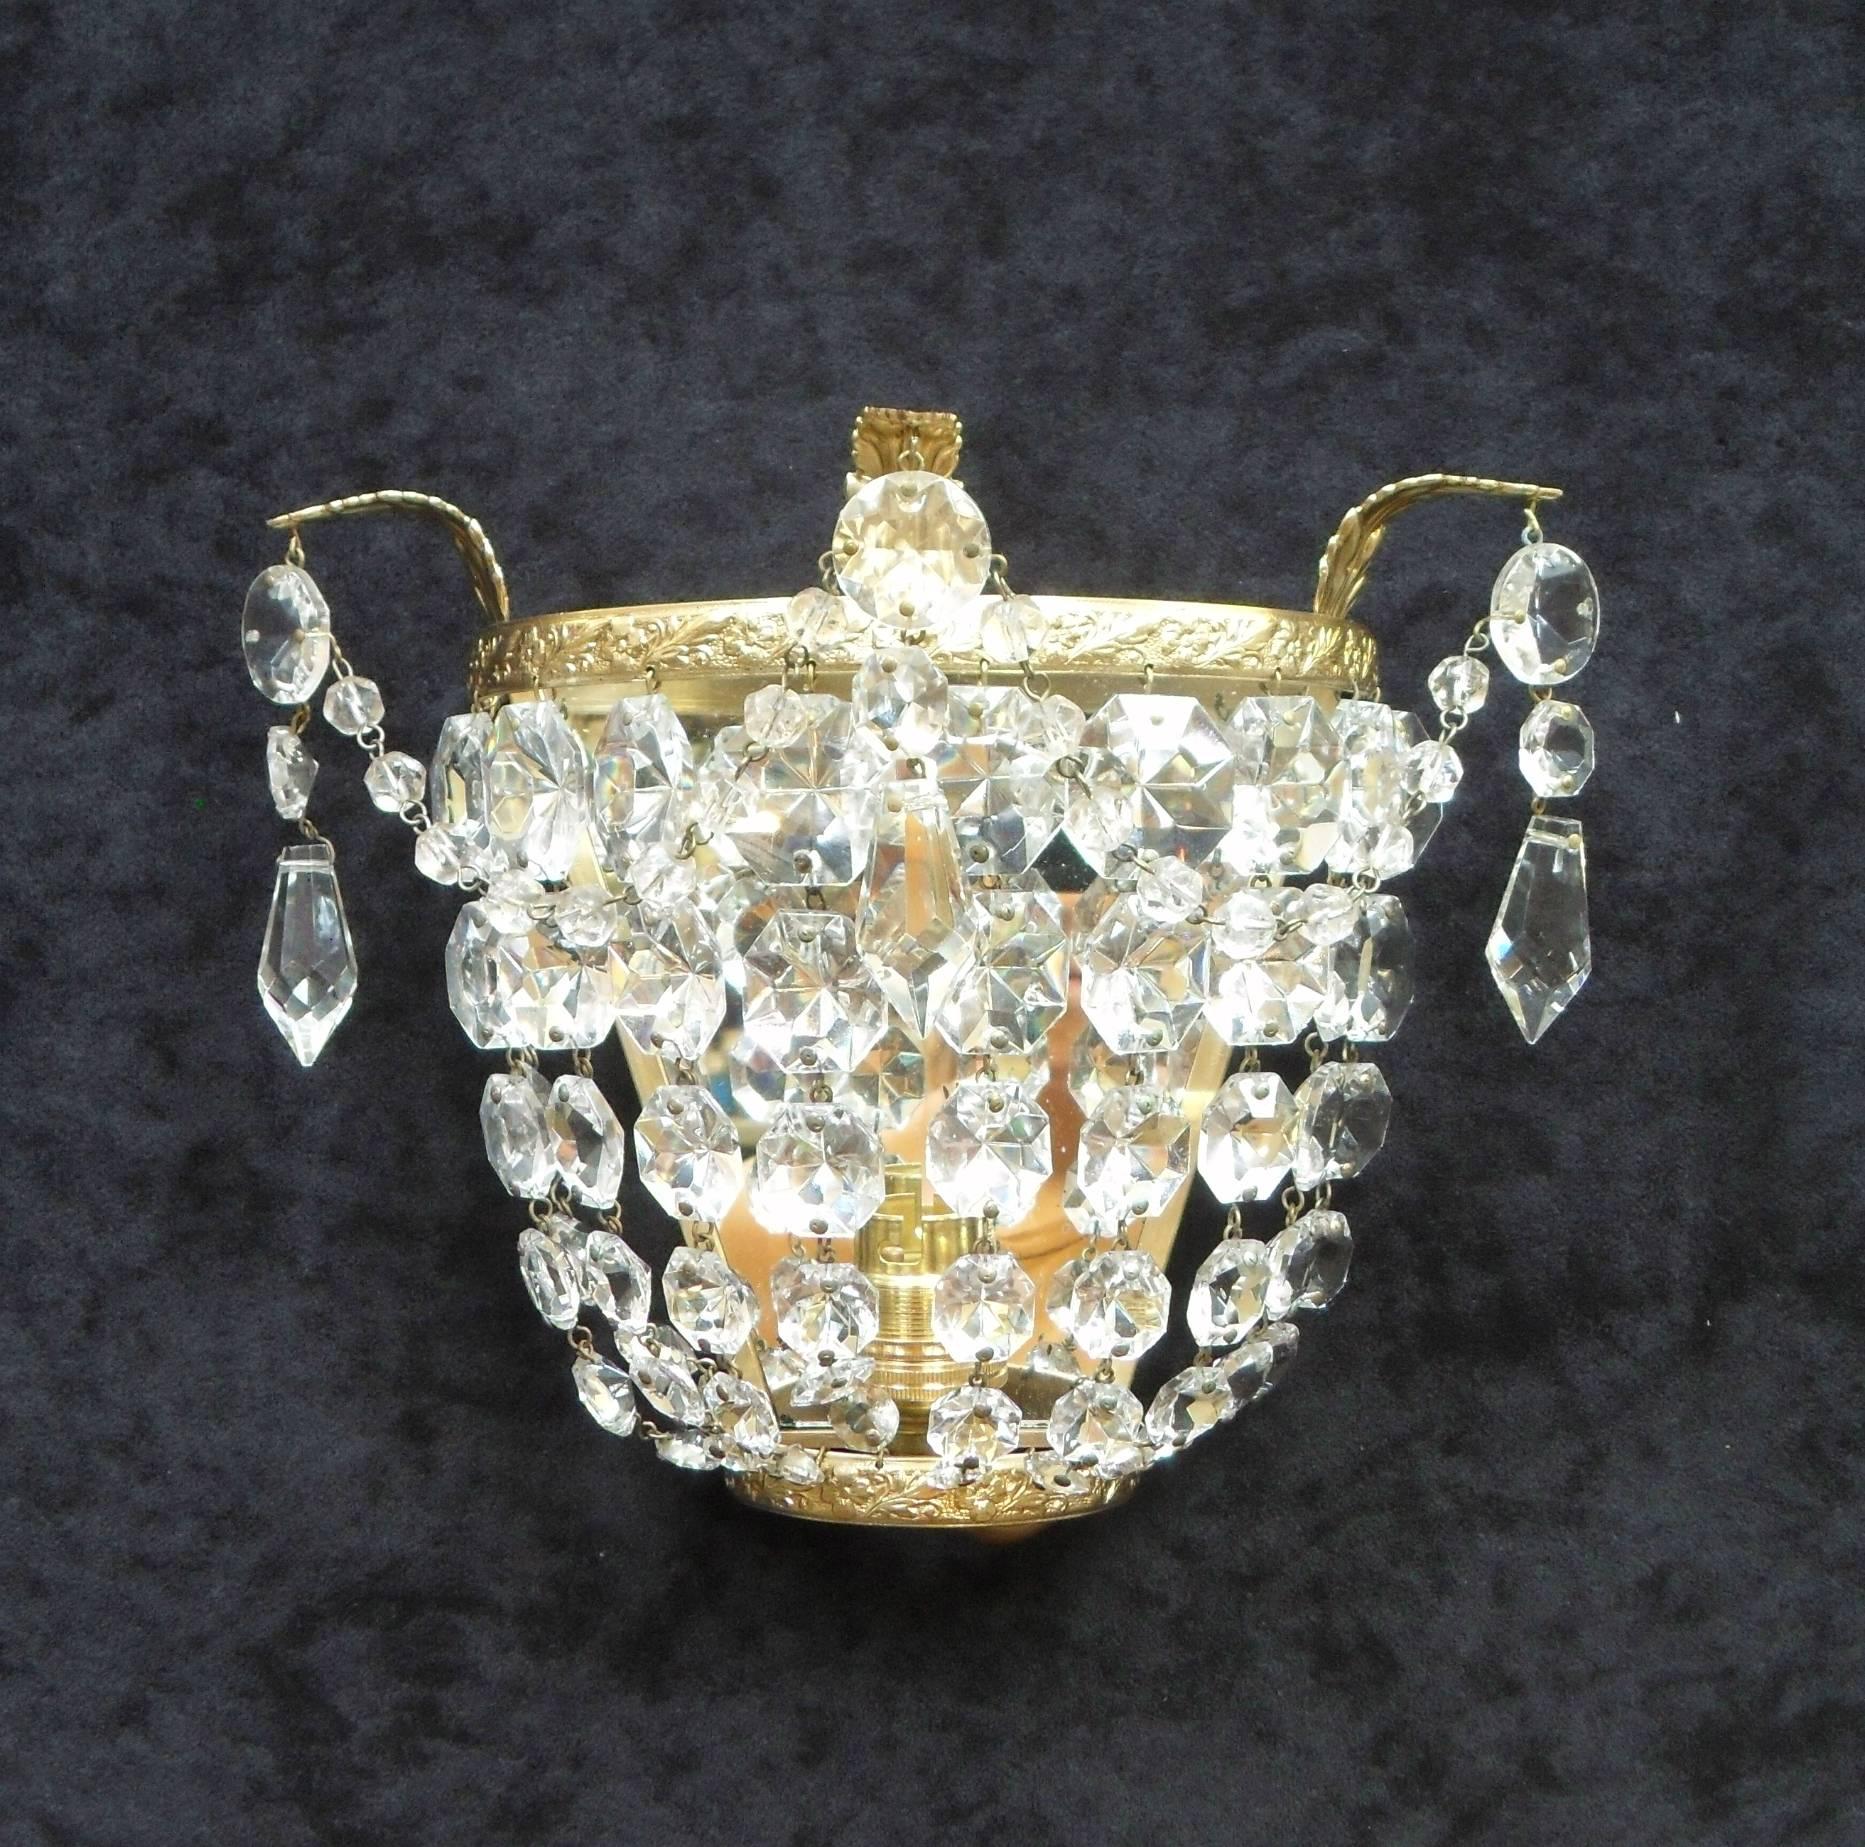 An extremely good quality pair of Italian Art Deco basket shaped wall lights with graduating diamond shaped cut crystal glass, glass beaded swags and hanging pendants. The lights have decorative floral leaf scrolling brass frames with hanging leaves